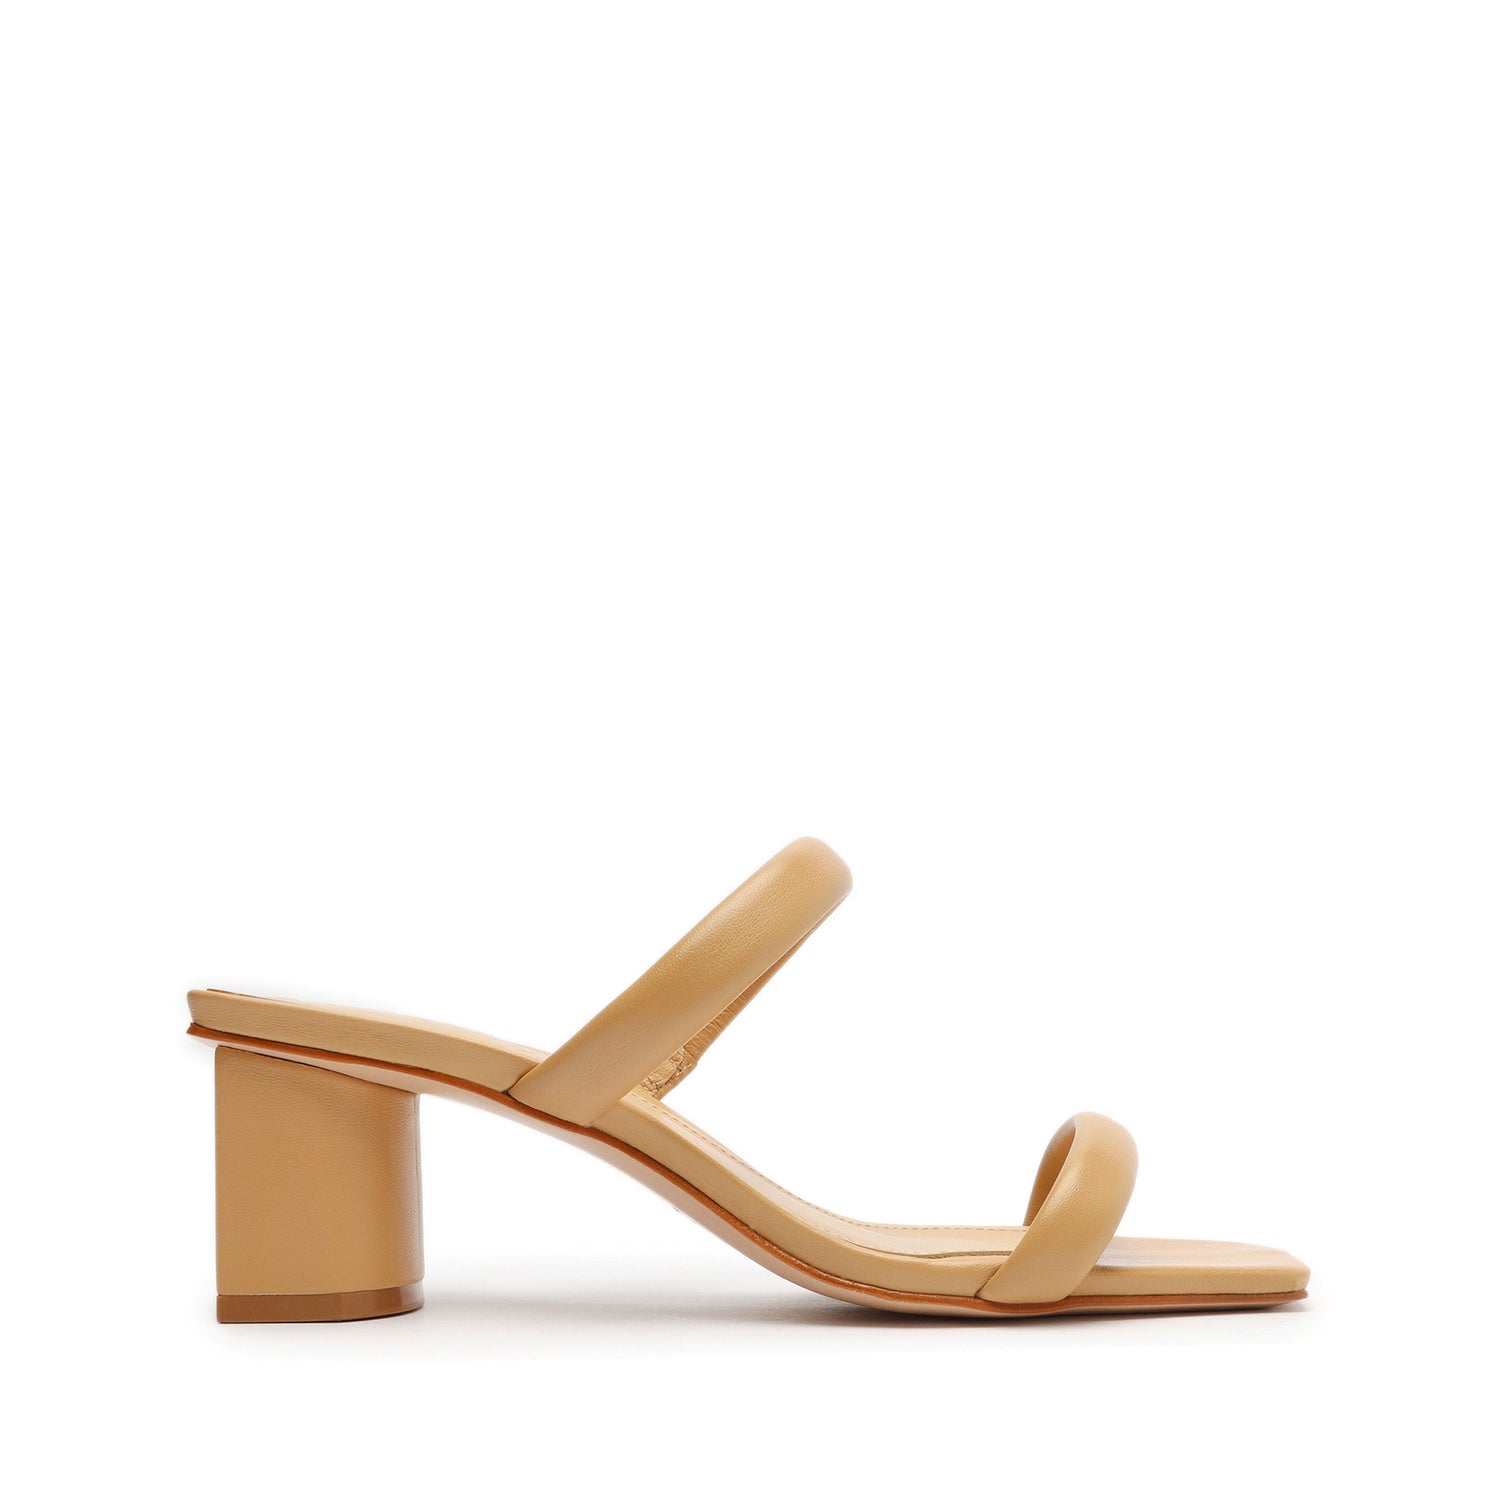 Ully Lo Nappa Leather Sandal Light Beige Leather